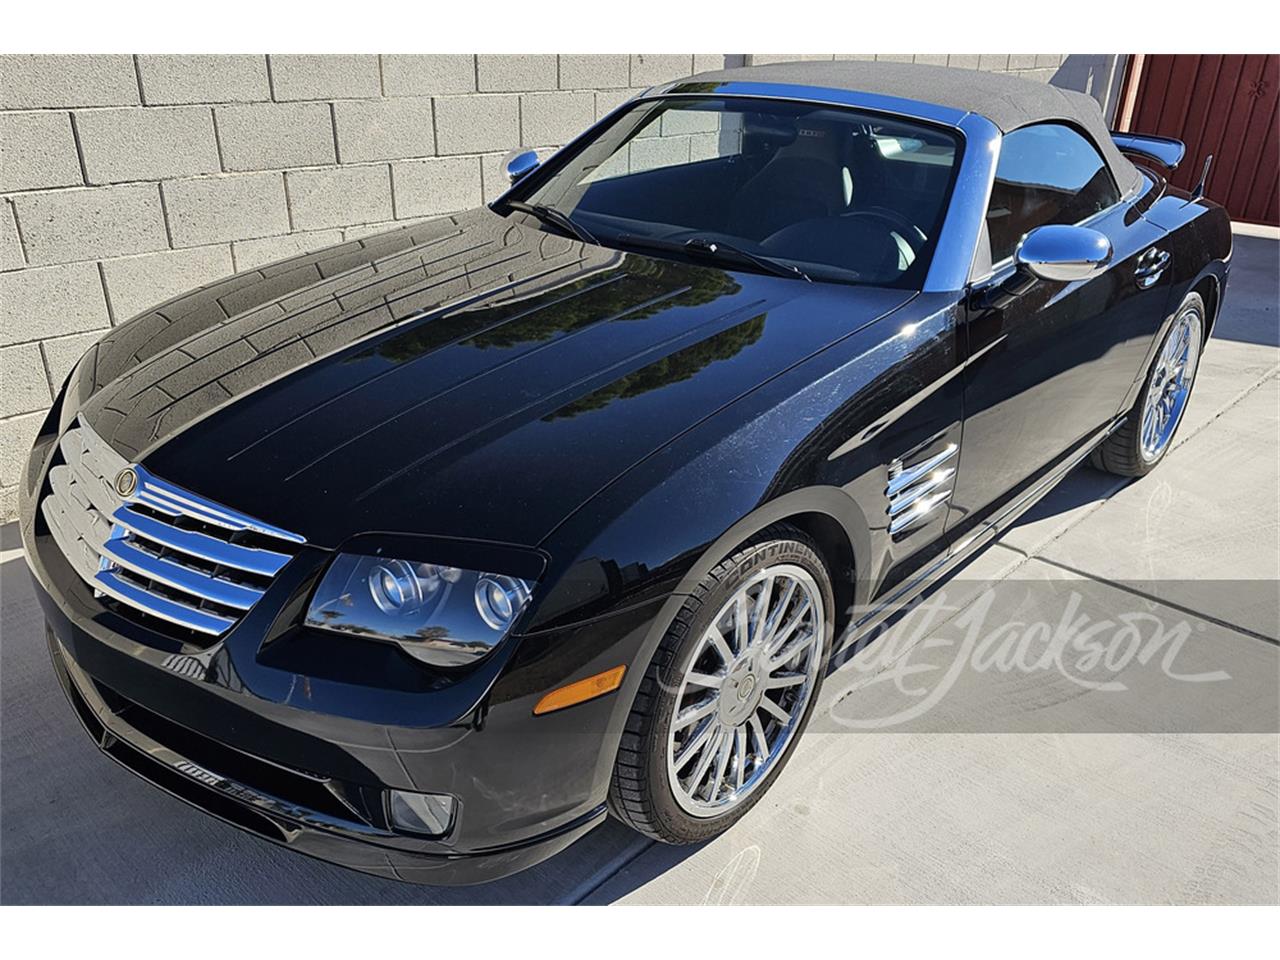 For Sale at Auction: 2005 Chrysler Crossfire in Scottsdale, Arizona for sale in Scottsdale, AZ